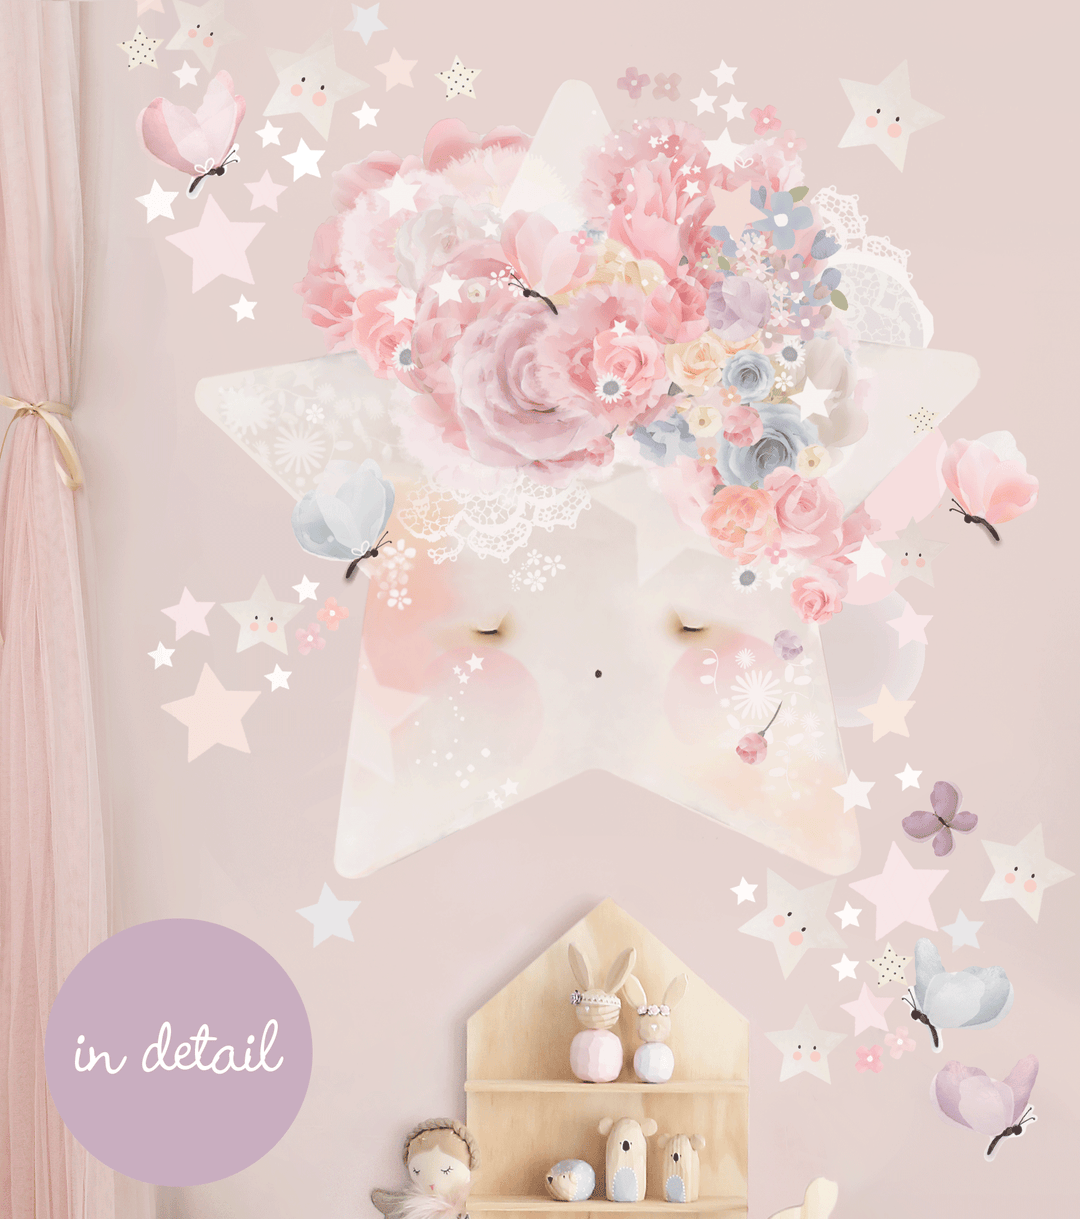 Schmooks | Wish Upon A Star Wall Decal - Pink